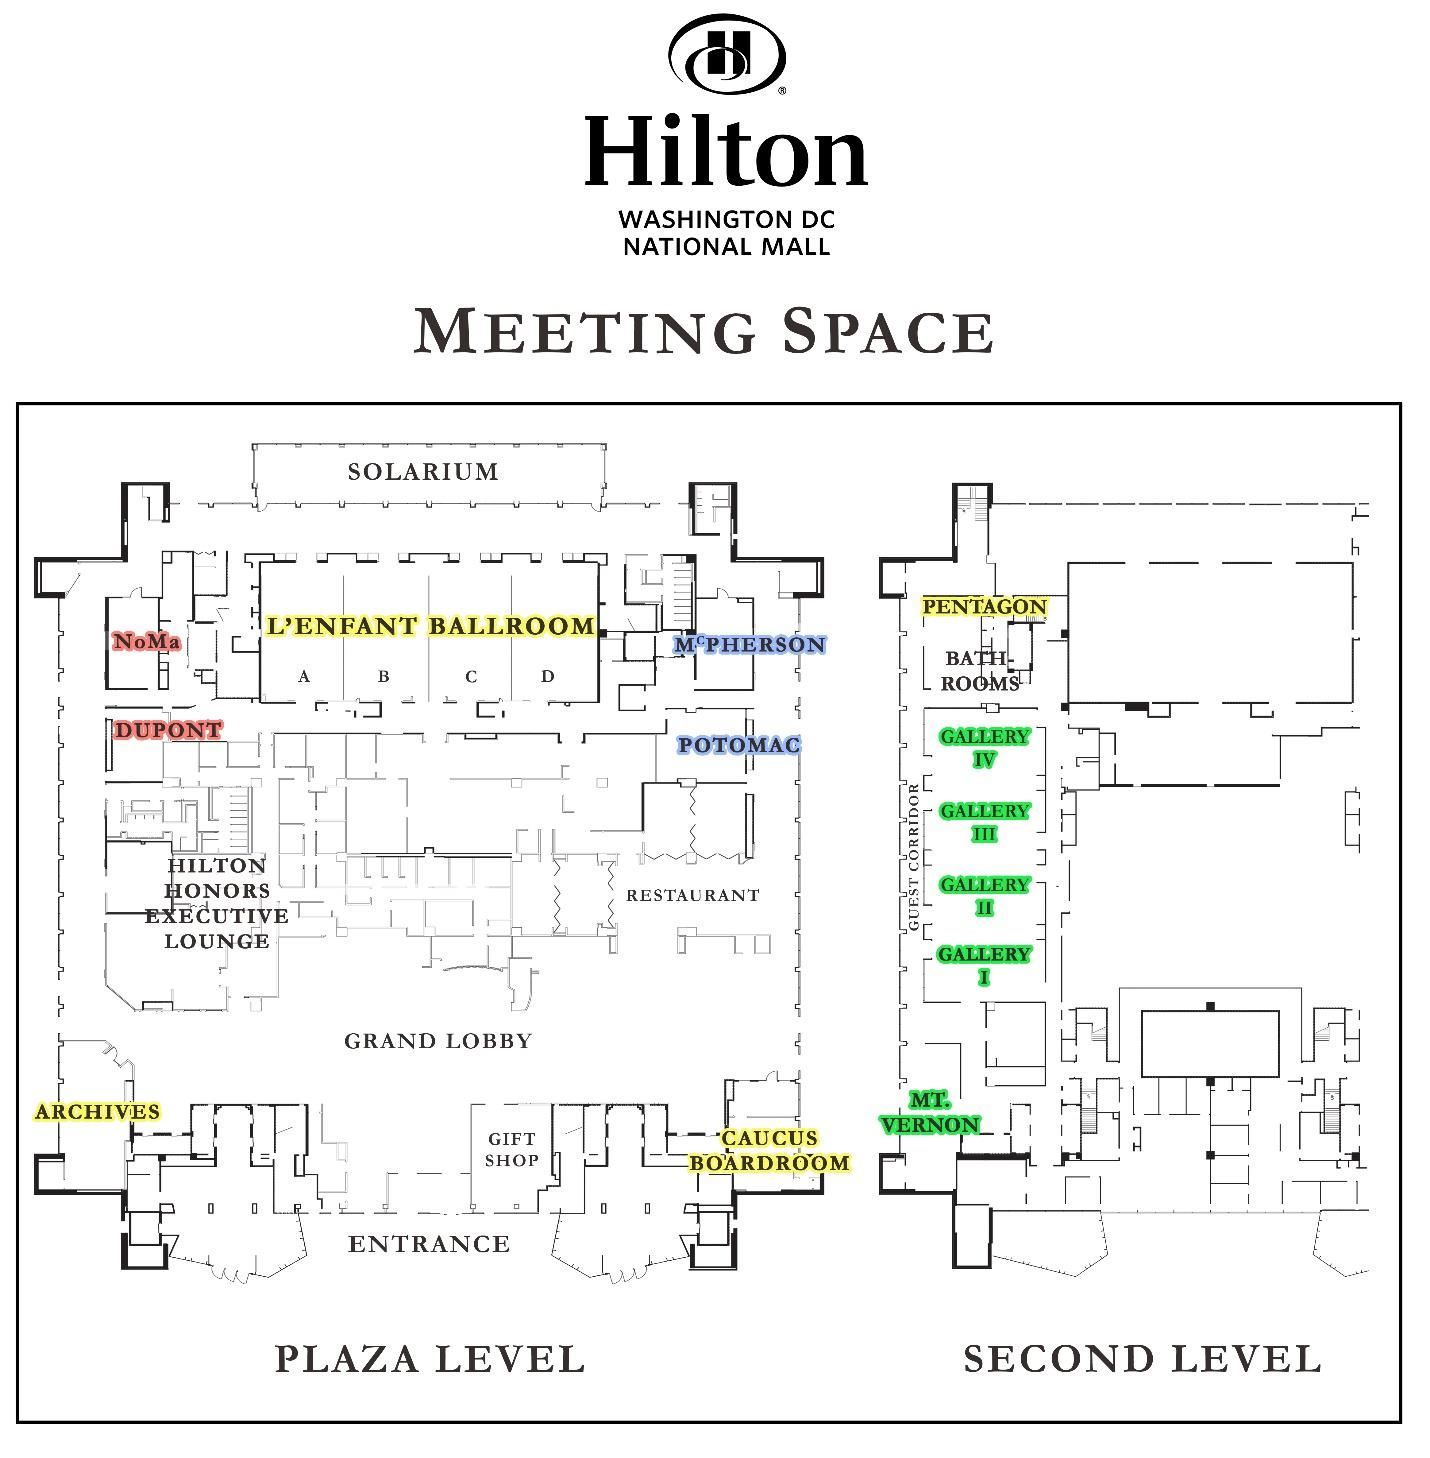 Hilton Hotel Meeting Space Map